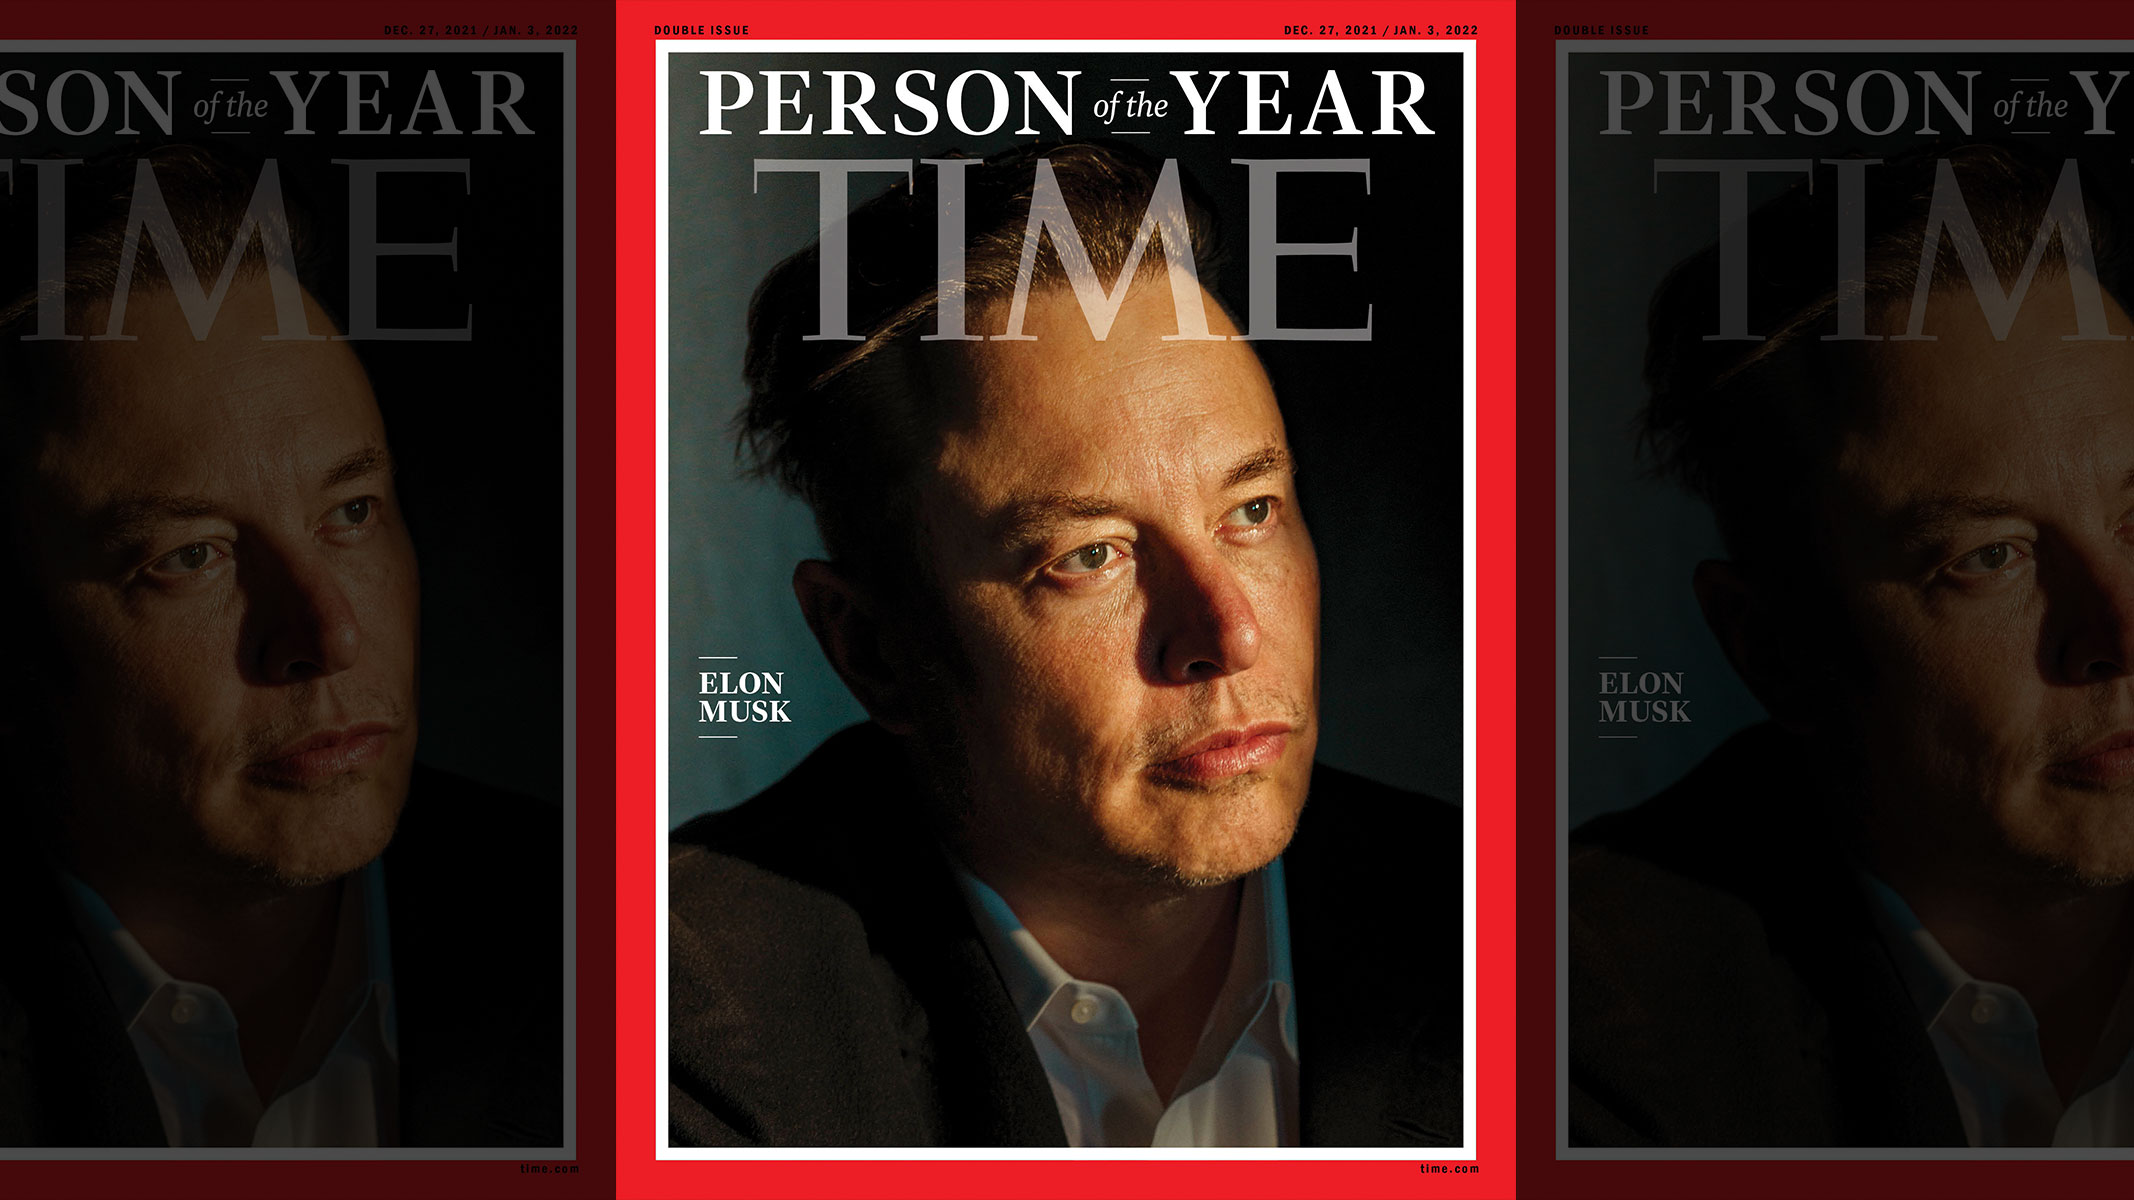 https://api.time.com/wp-content/uploads/2019/12/time-person-of-the-year-elon-musk-the-choice-social2.jpg?quality=85